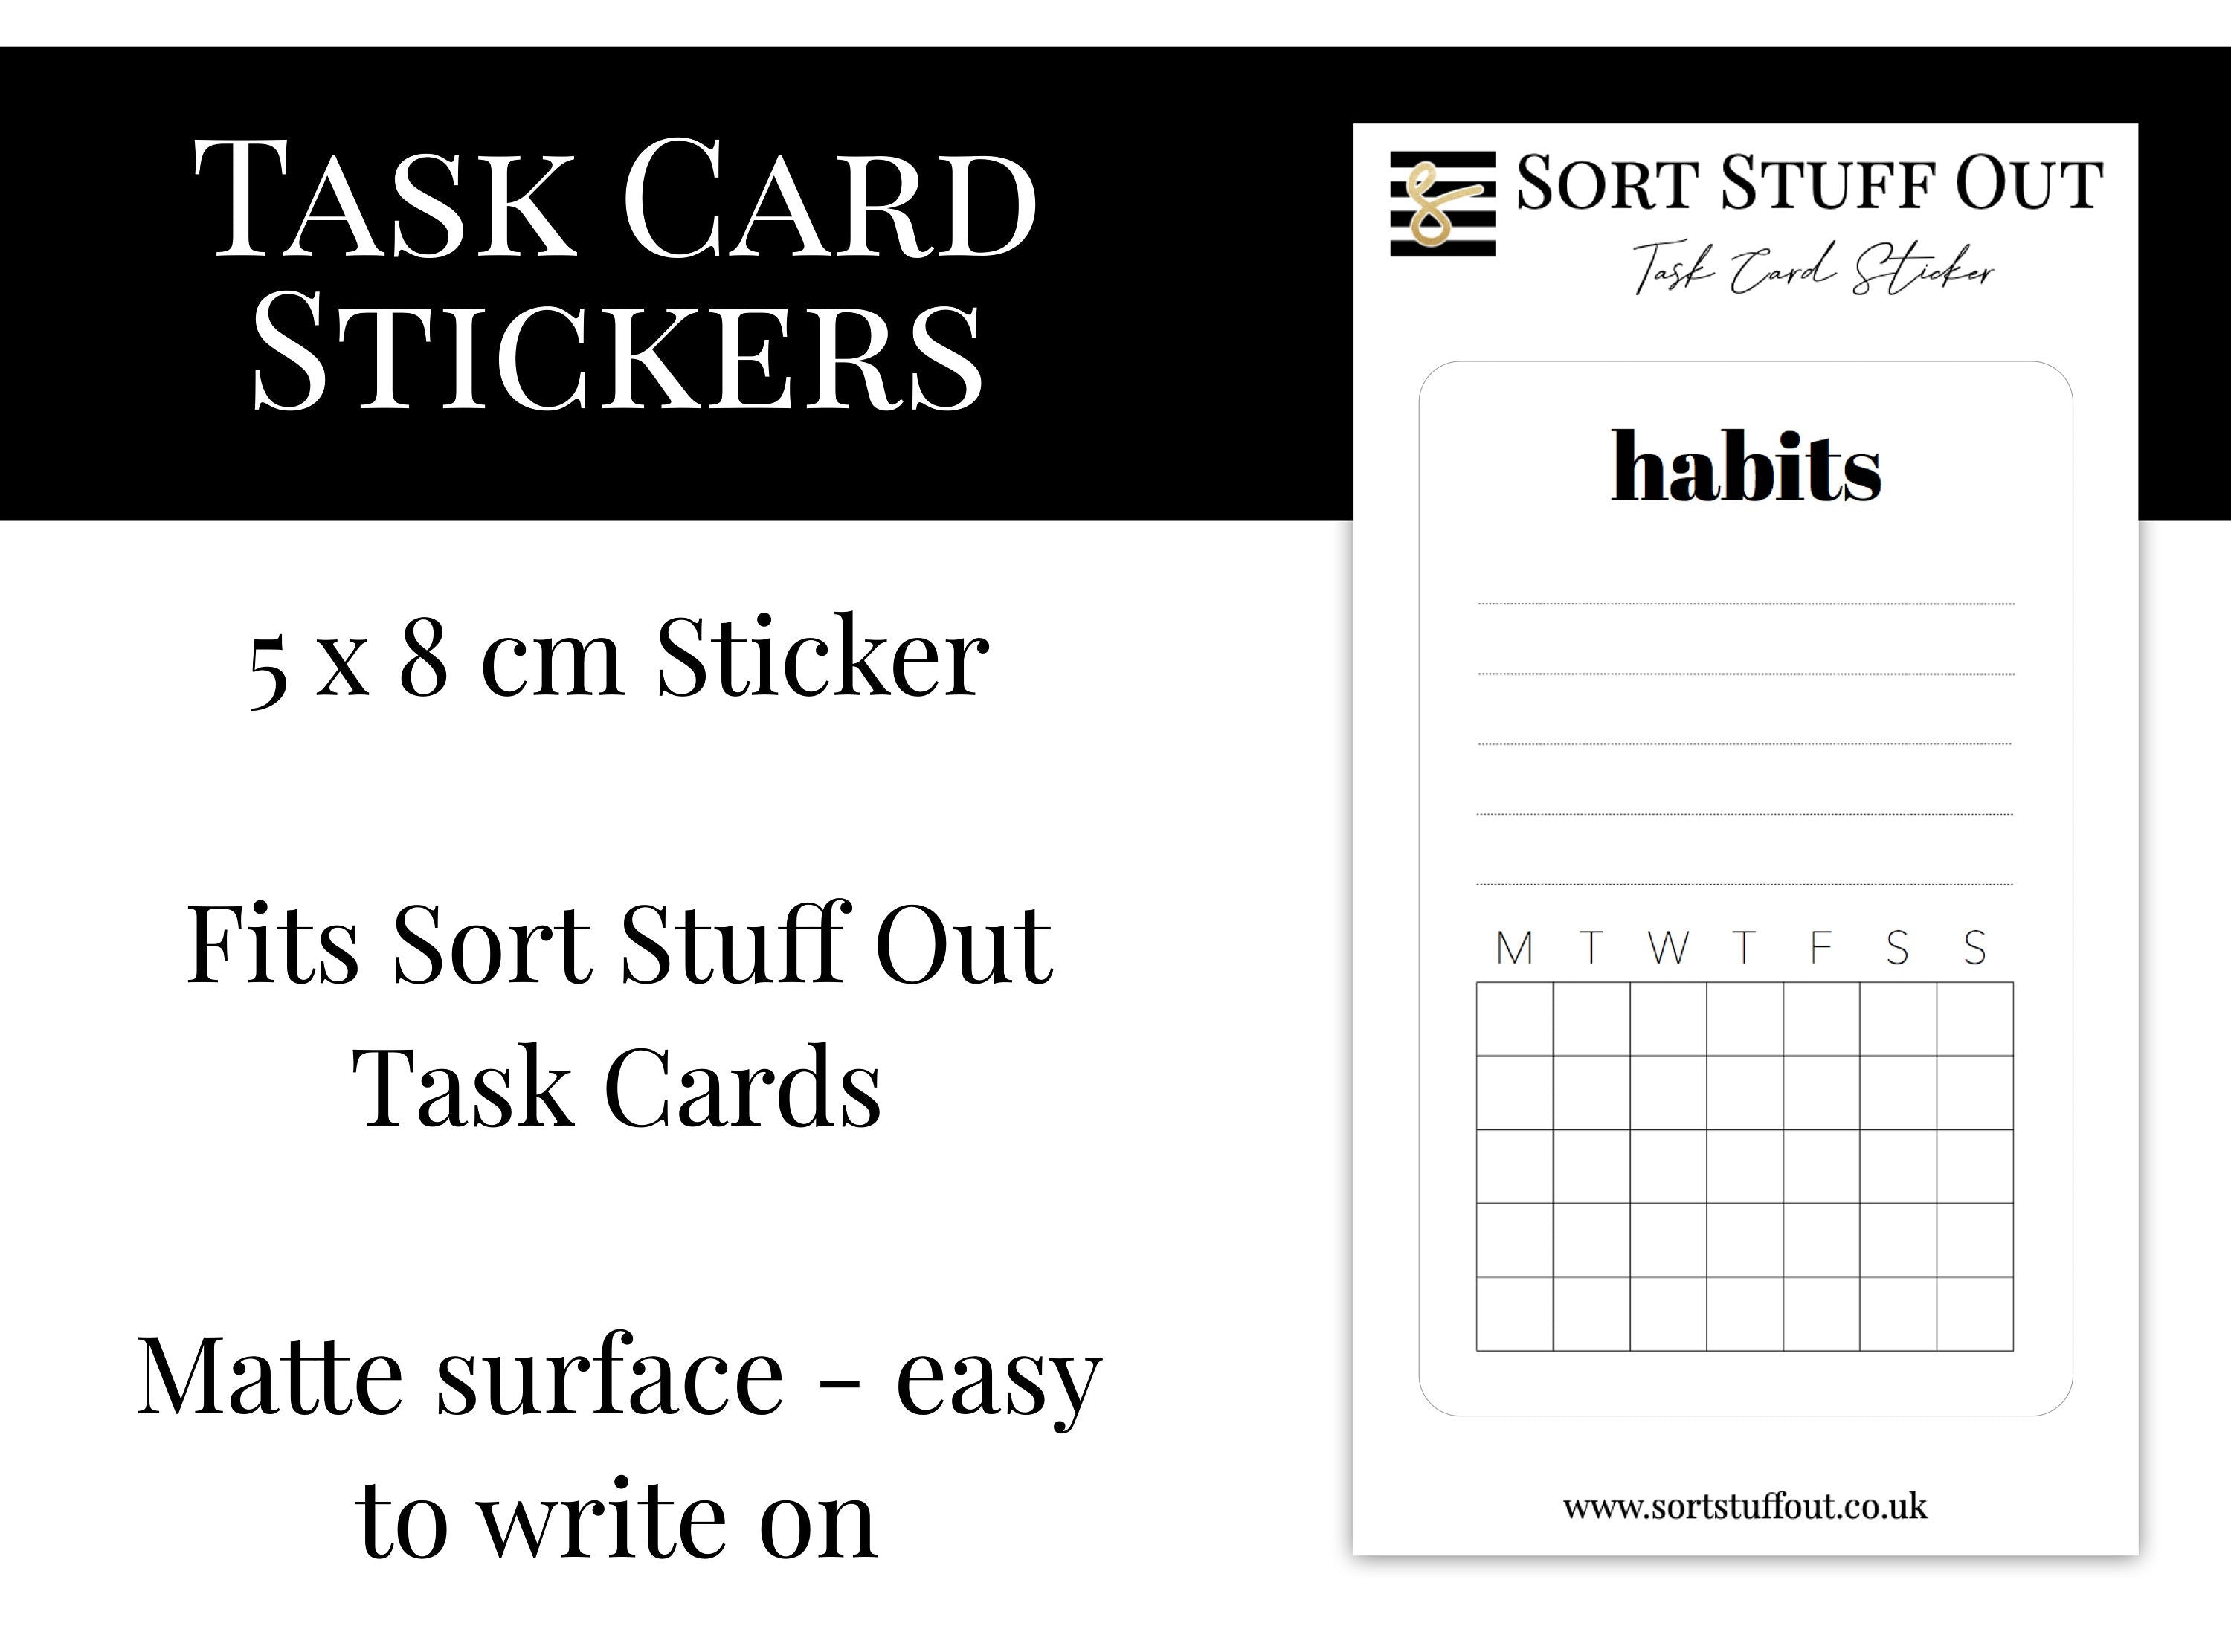 Task Card Sticker - Habits Single Sticker for Credit Card Size Cards